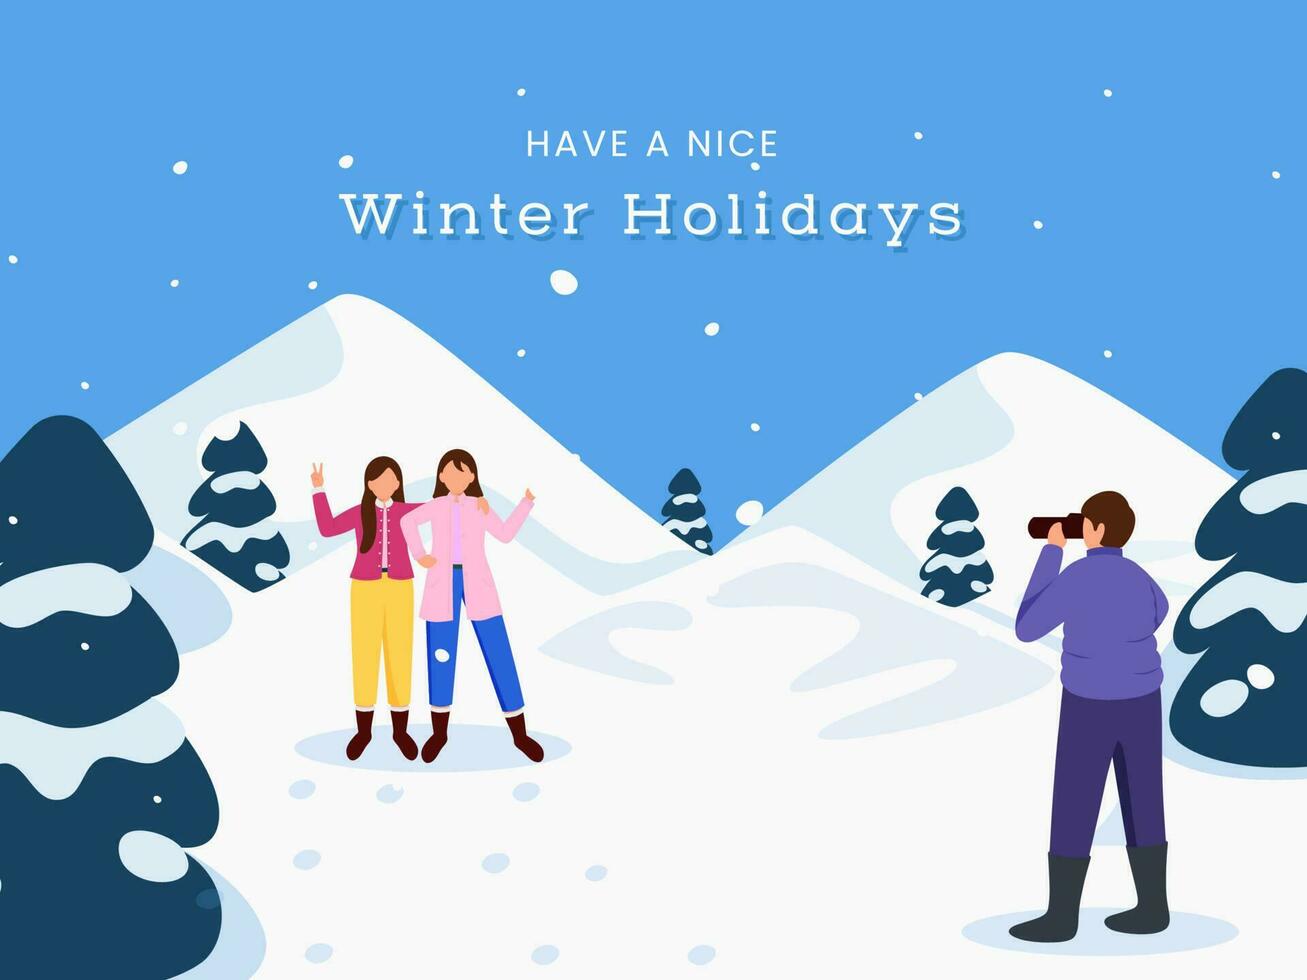 Have A Nice Winter Holidays Concept With Cartoon Male Taking Photo Of Two Young Girls And Xmas Tree On Snowy Mountain Blue Background. vector